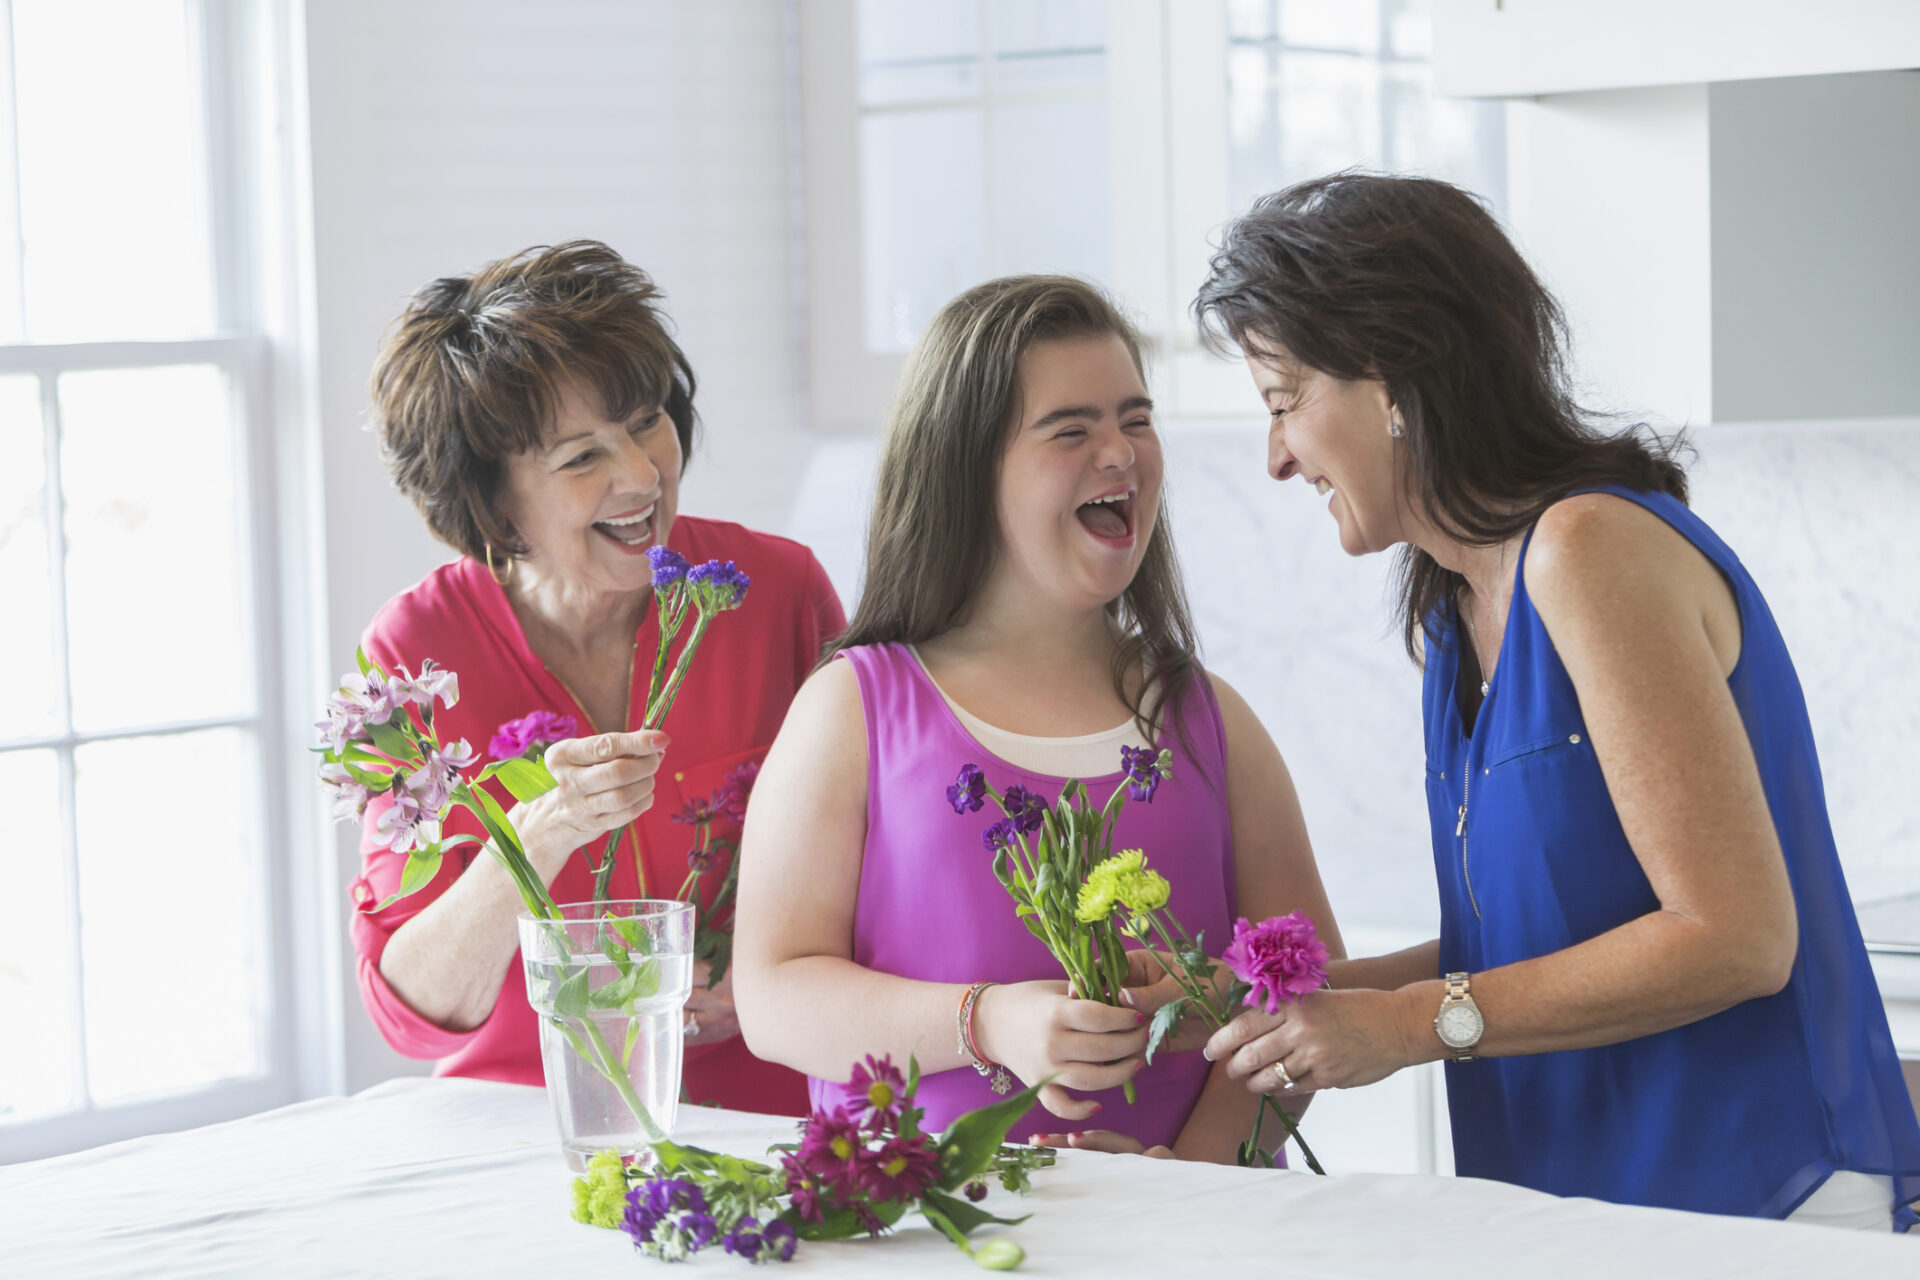 A teenage girl with downs syndrome arranging flowers with her mother and grandmother. They are holding cut flowers in their hands, talking, laughing and looking at mom. They are at home in the kitchen by a bright, sunny window.